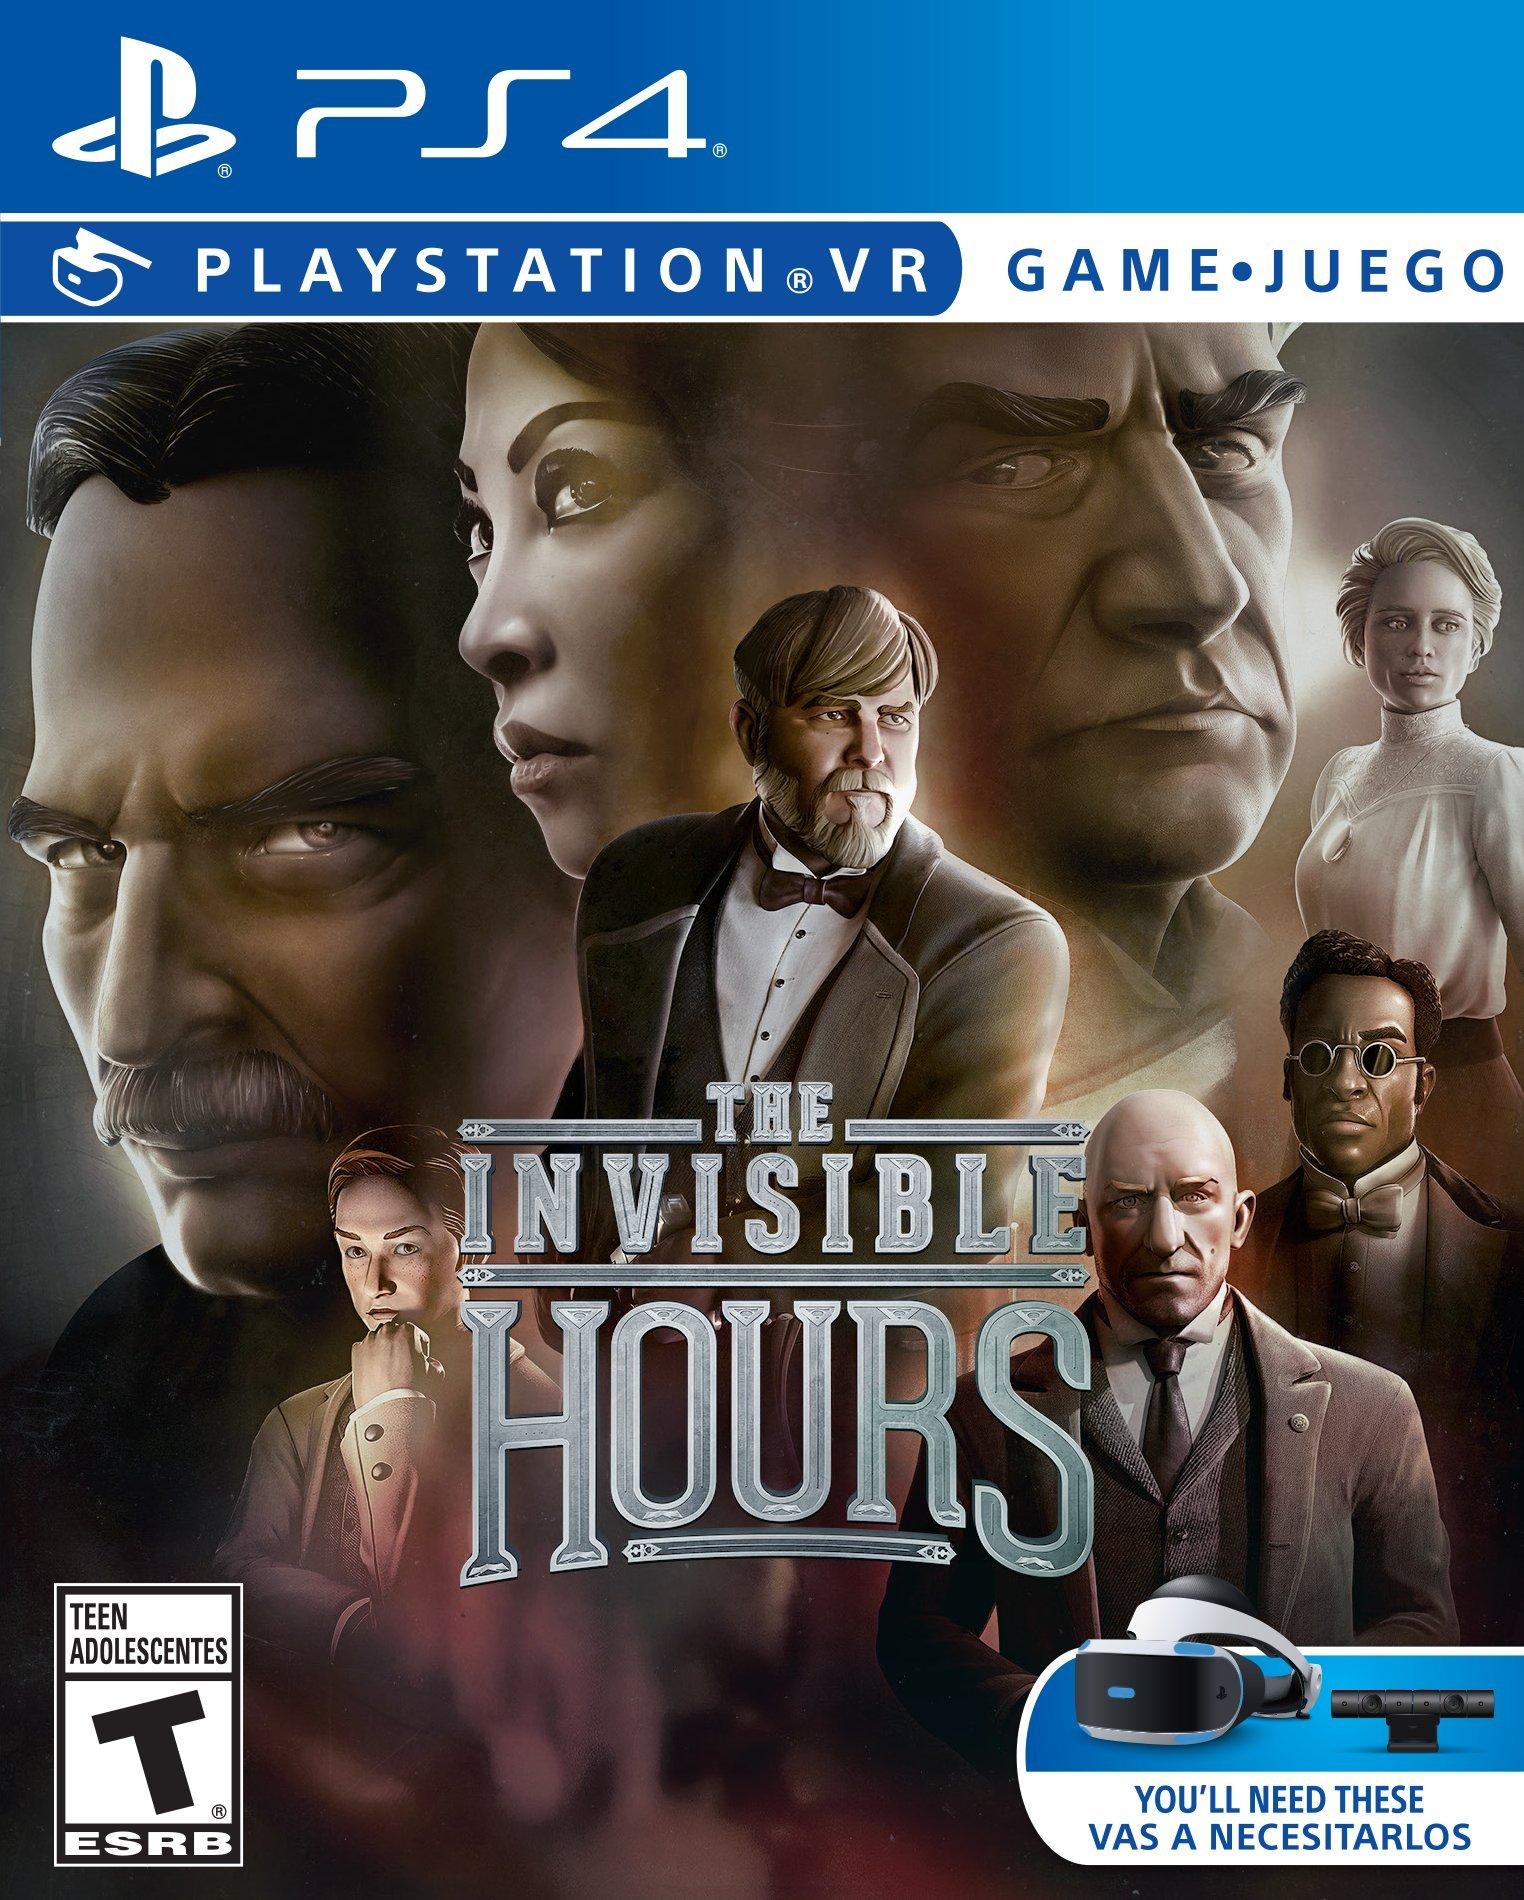 invisible hours vr